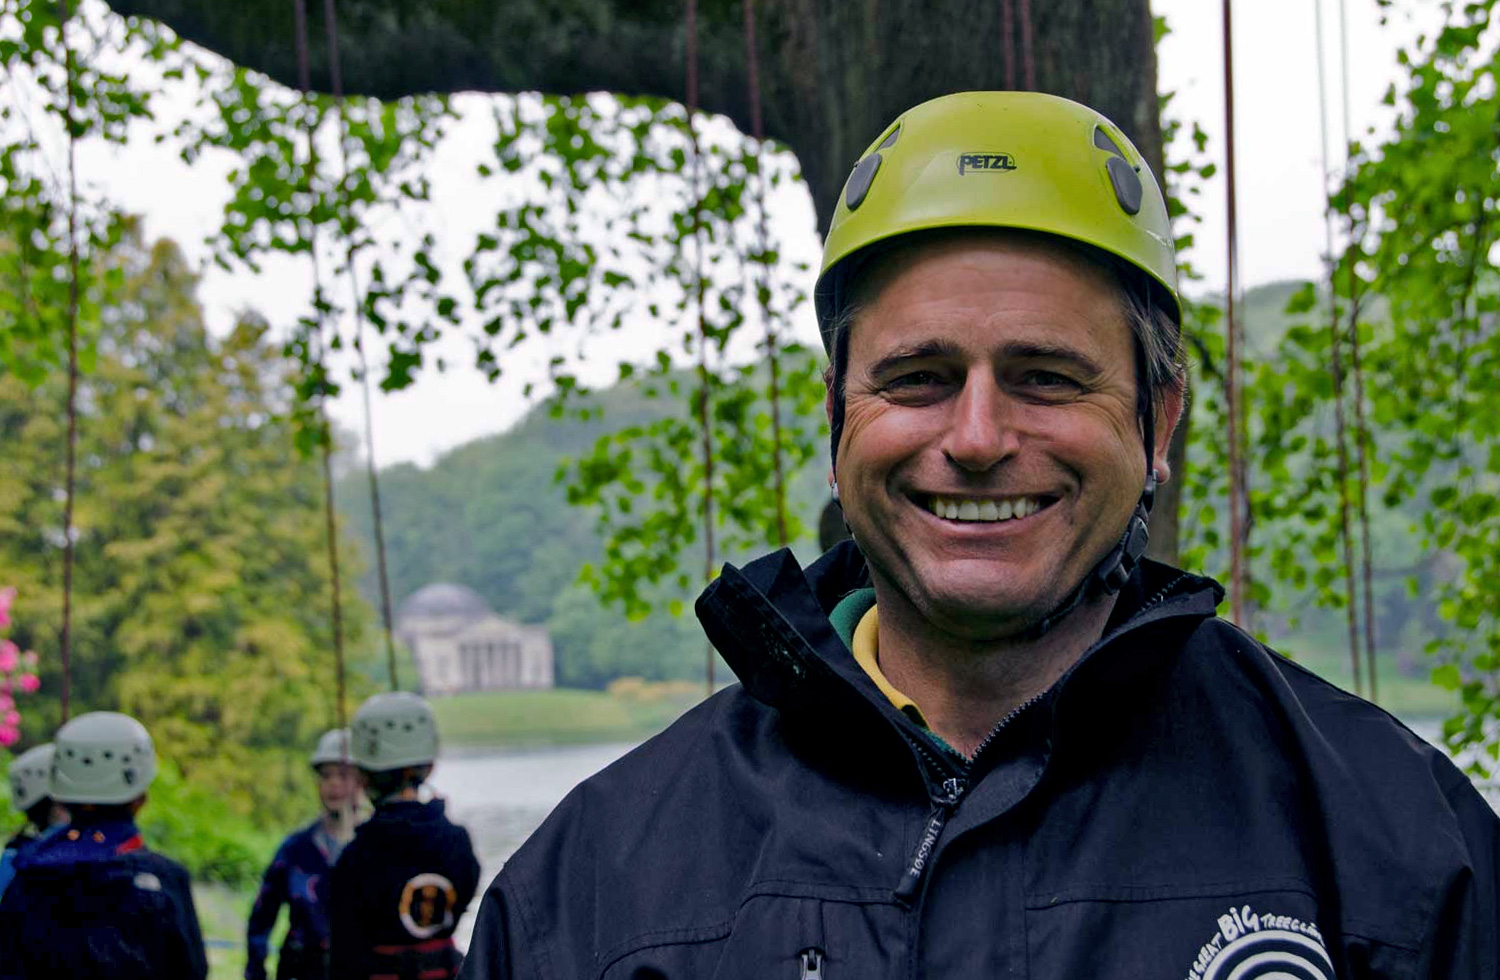 Mark Hawes - Tree Surgeon and Director of The Great Big Tree Climing Co.